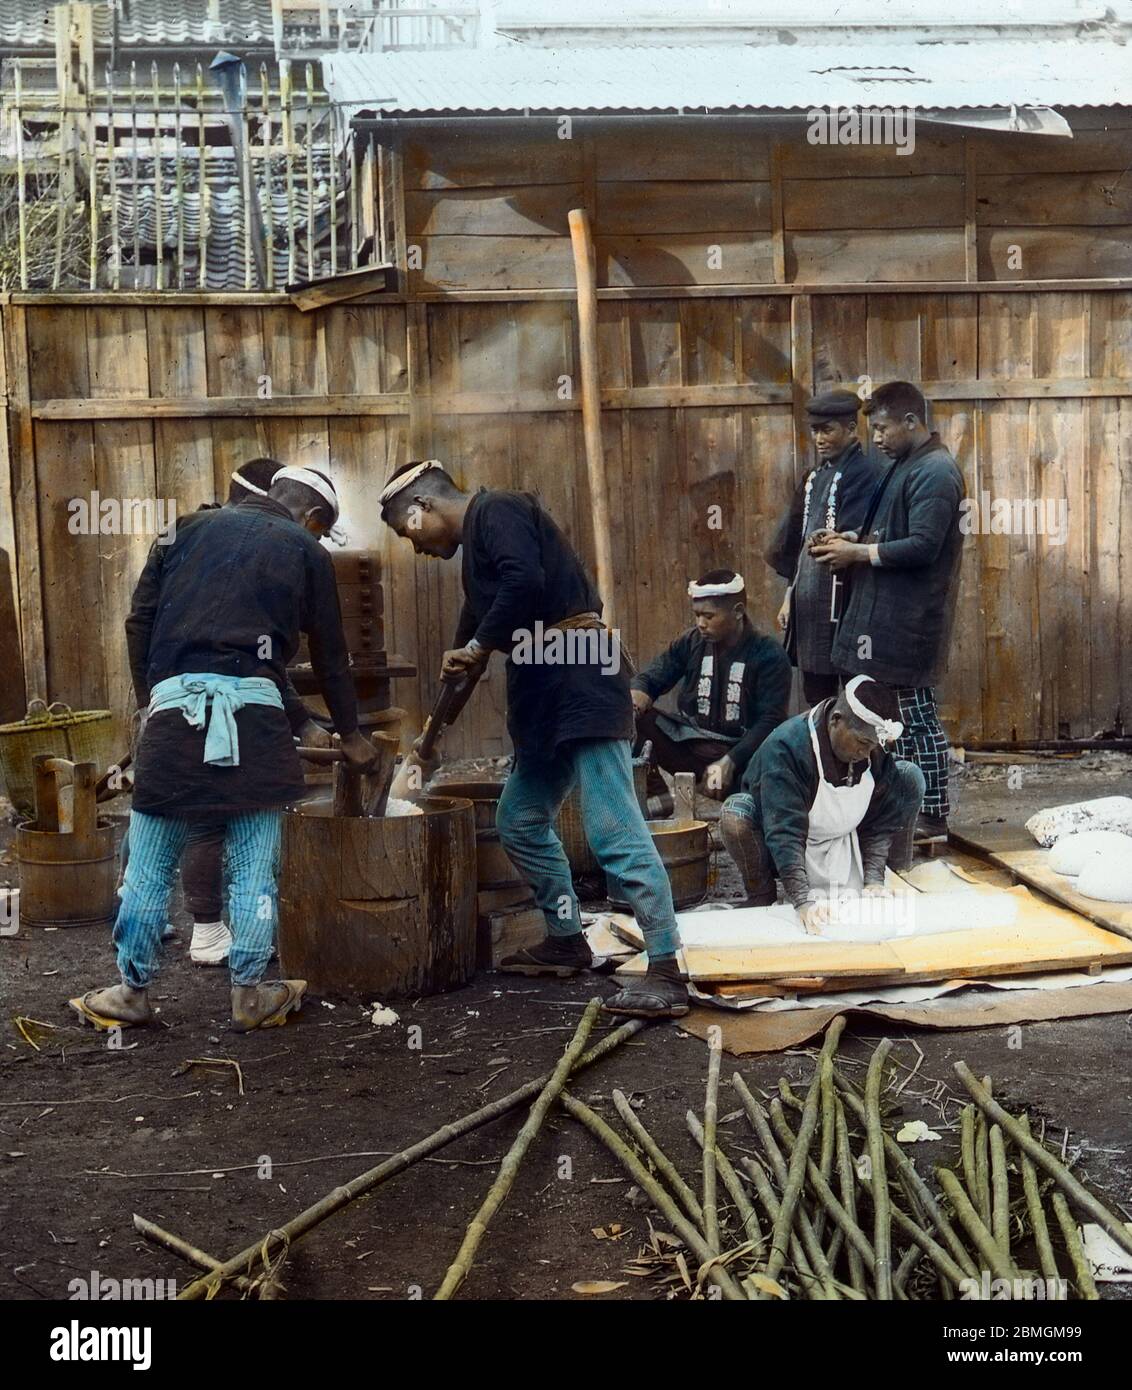 [ 1900s Japan - Japanese Pounding Rice ] —   Pounding glutinous rice to make mochi rice cakes.  Original text: 'Making rice cake by beating in a wooden mortar.'  20th century vintage glass slide. Stock Photo